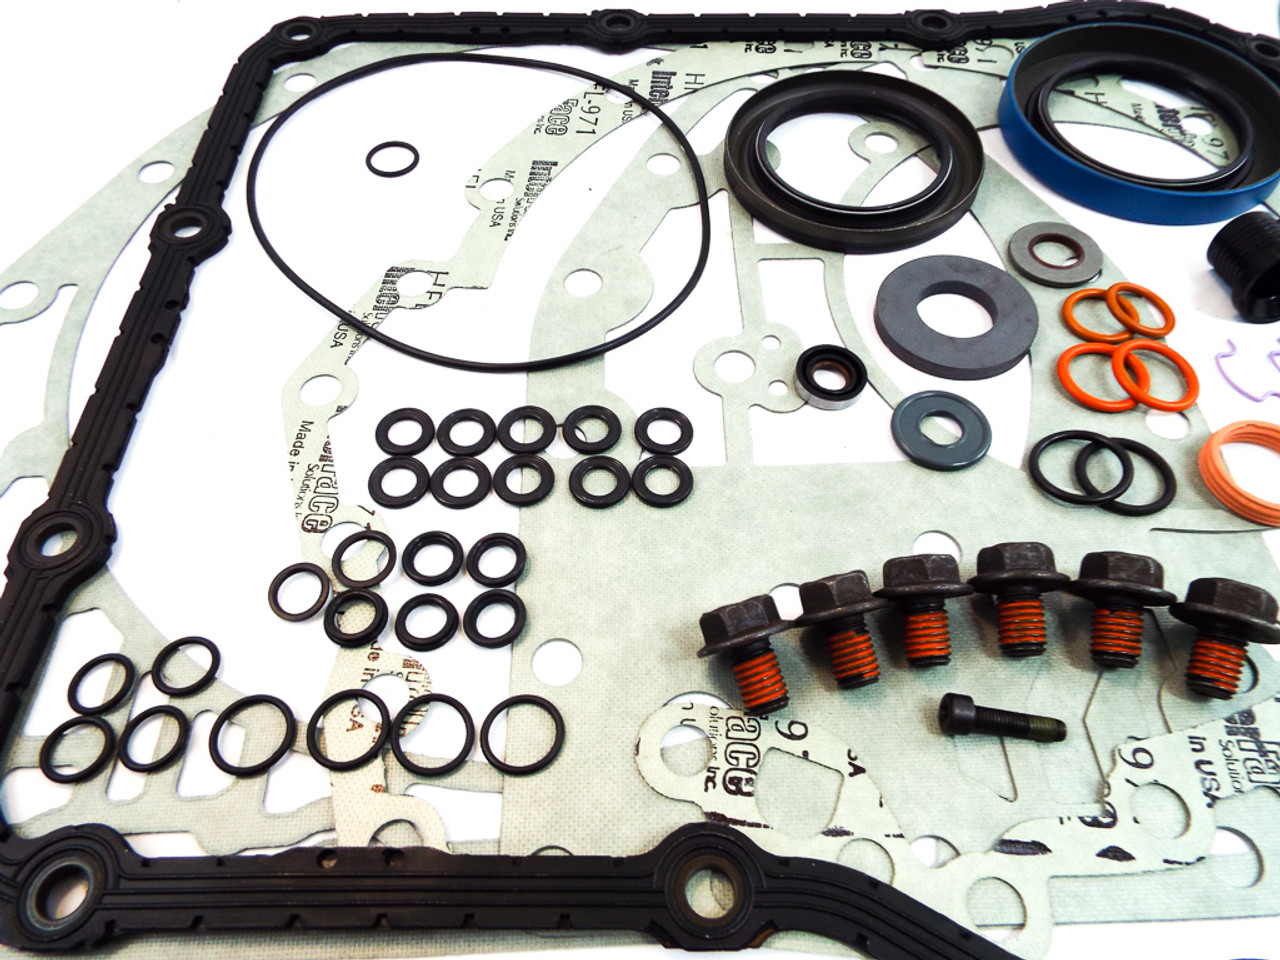 Get all the components you need for your Allison 1000/2000/2400 rebuild including all recomended bolt replacements with your Precision International overhaul kit.